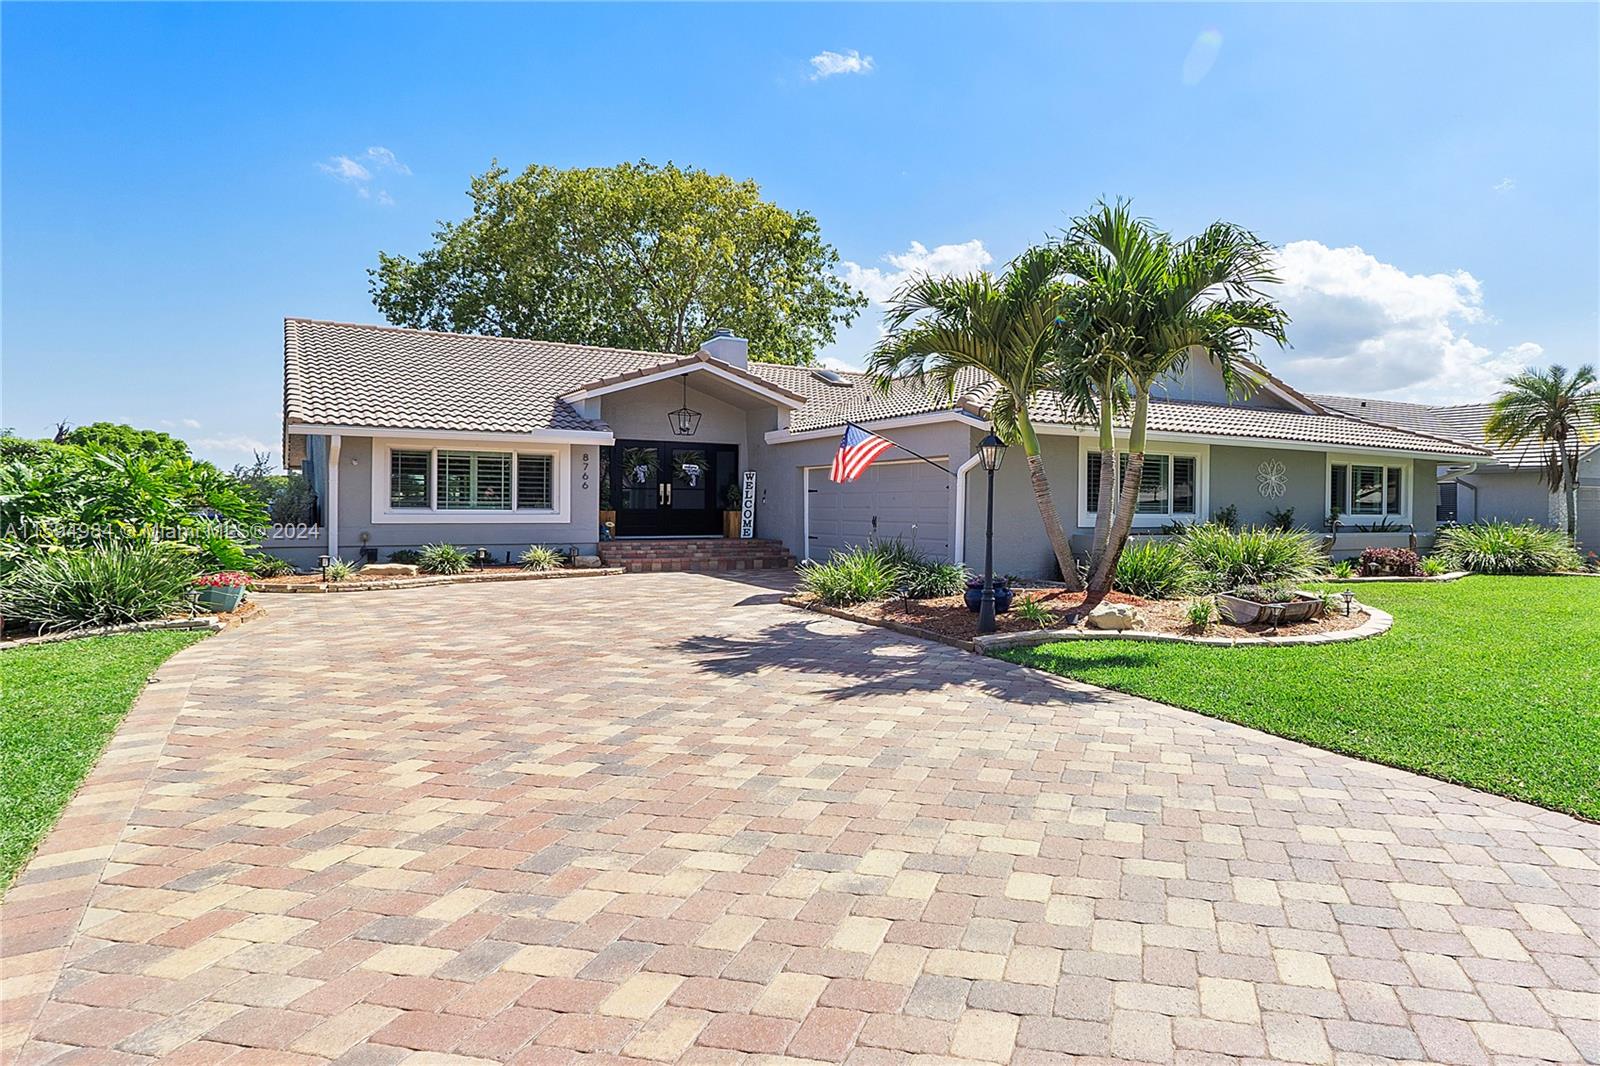 8766 Nw 54th St St, Coral Springs, Broward County, Florida - 4 Bedrooms  
3 Bathrooms - 